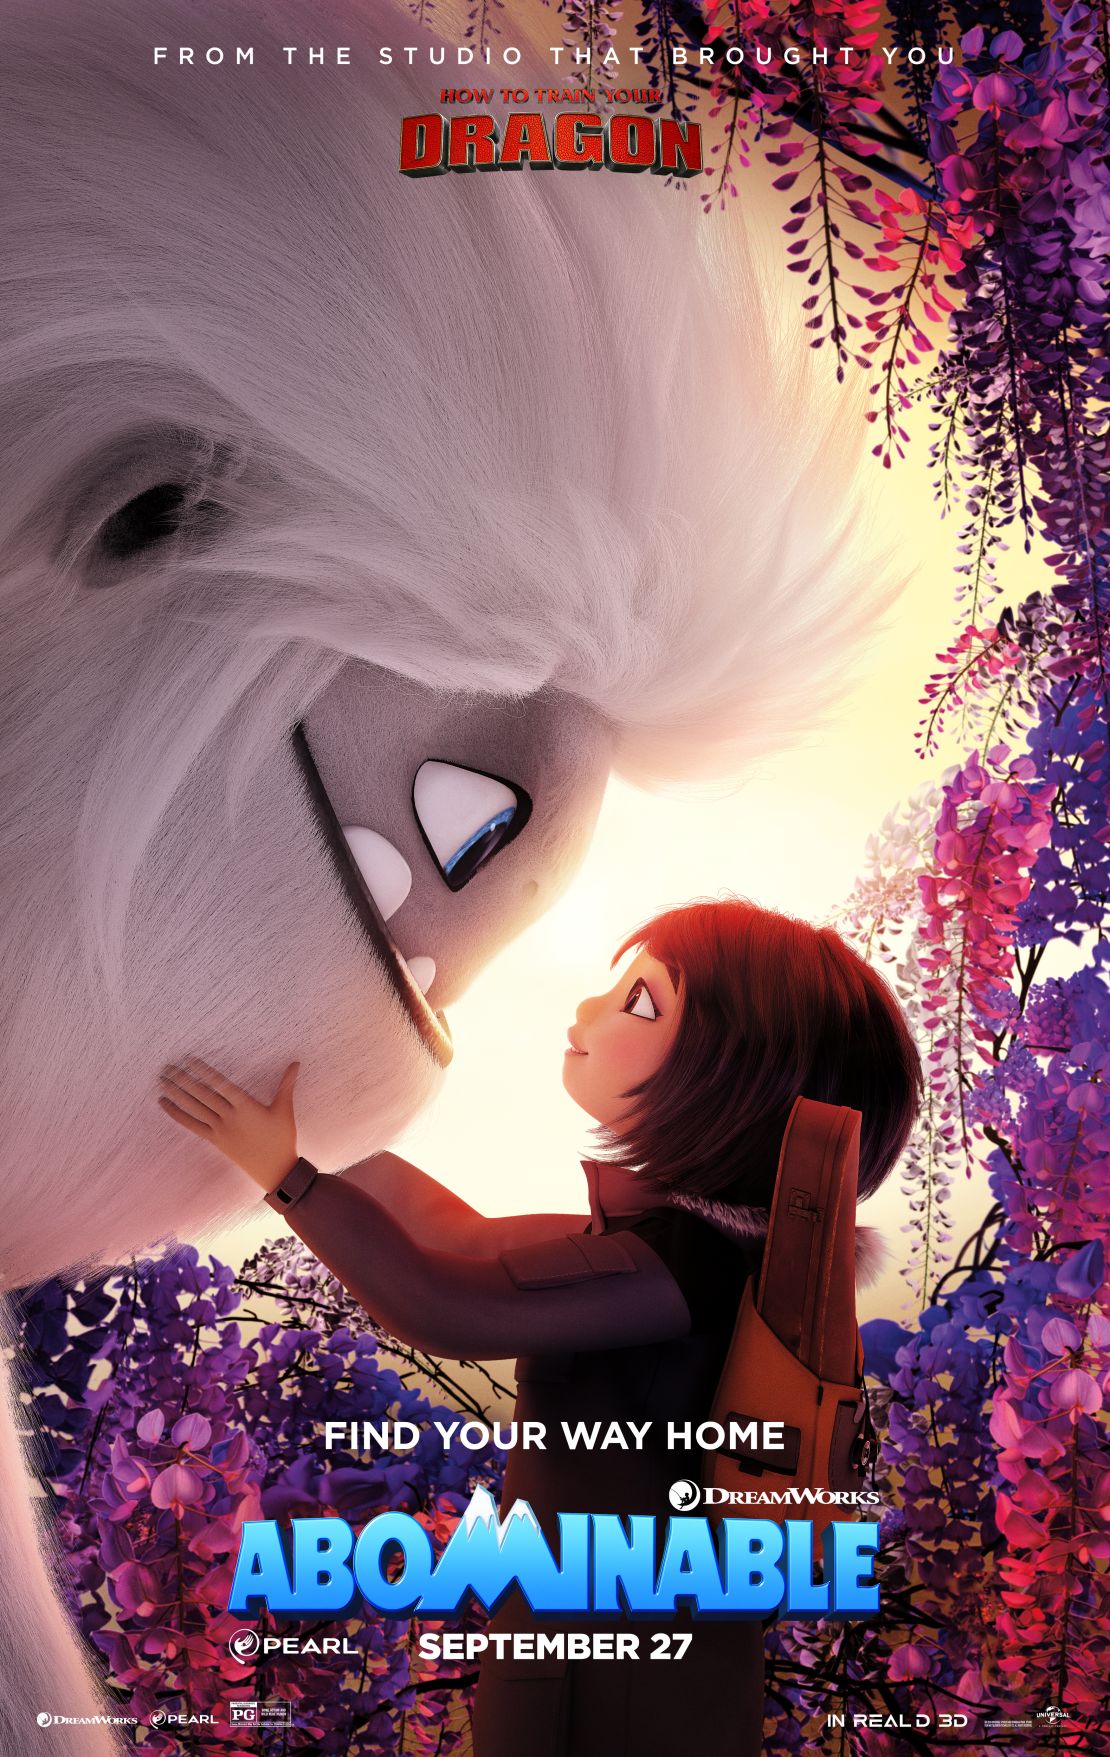 'Abominable' focused on the story of Yi (voiced by Chloe Bennet), a teenager who befriends and goes on an adventure with a yeti. The film grossed over $181 million worldwide, according to Box Office Mojo.